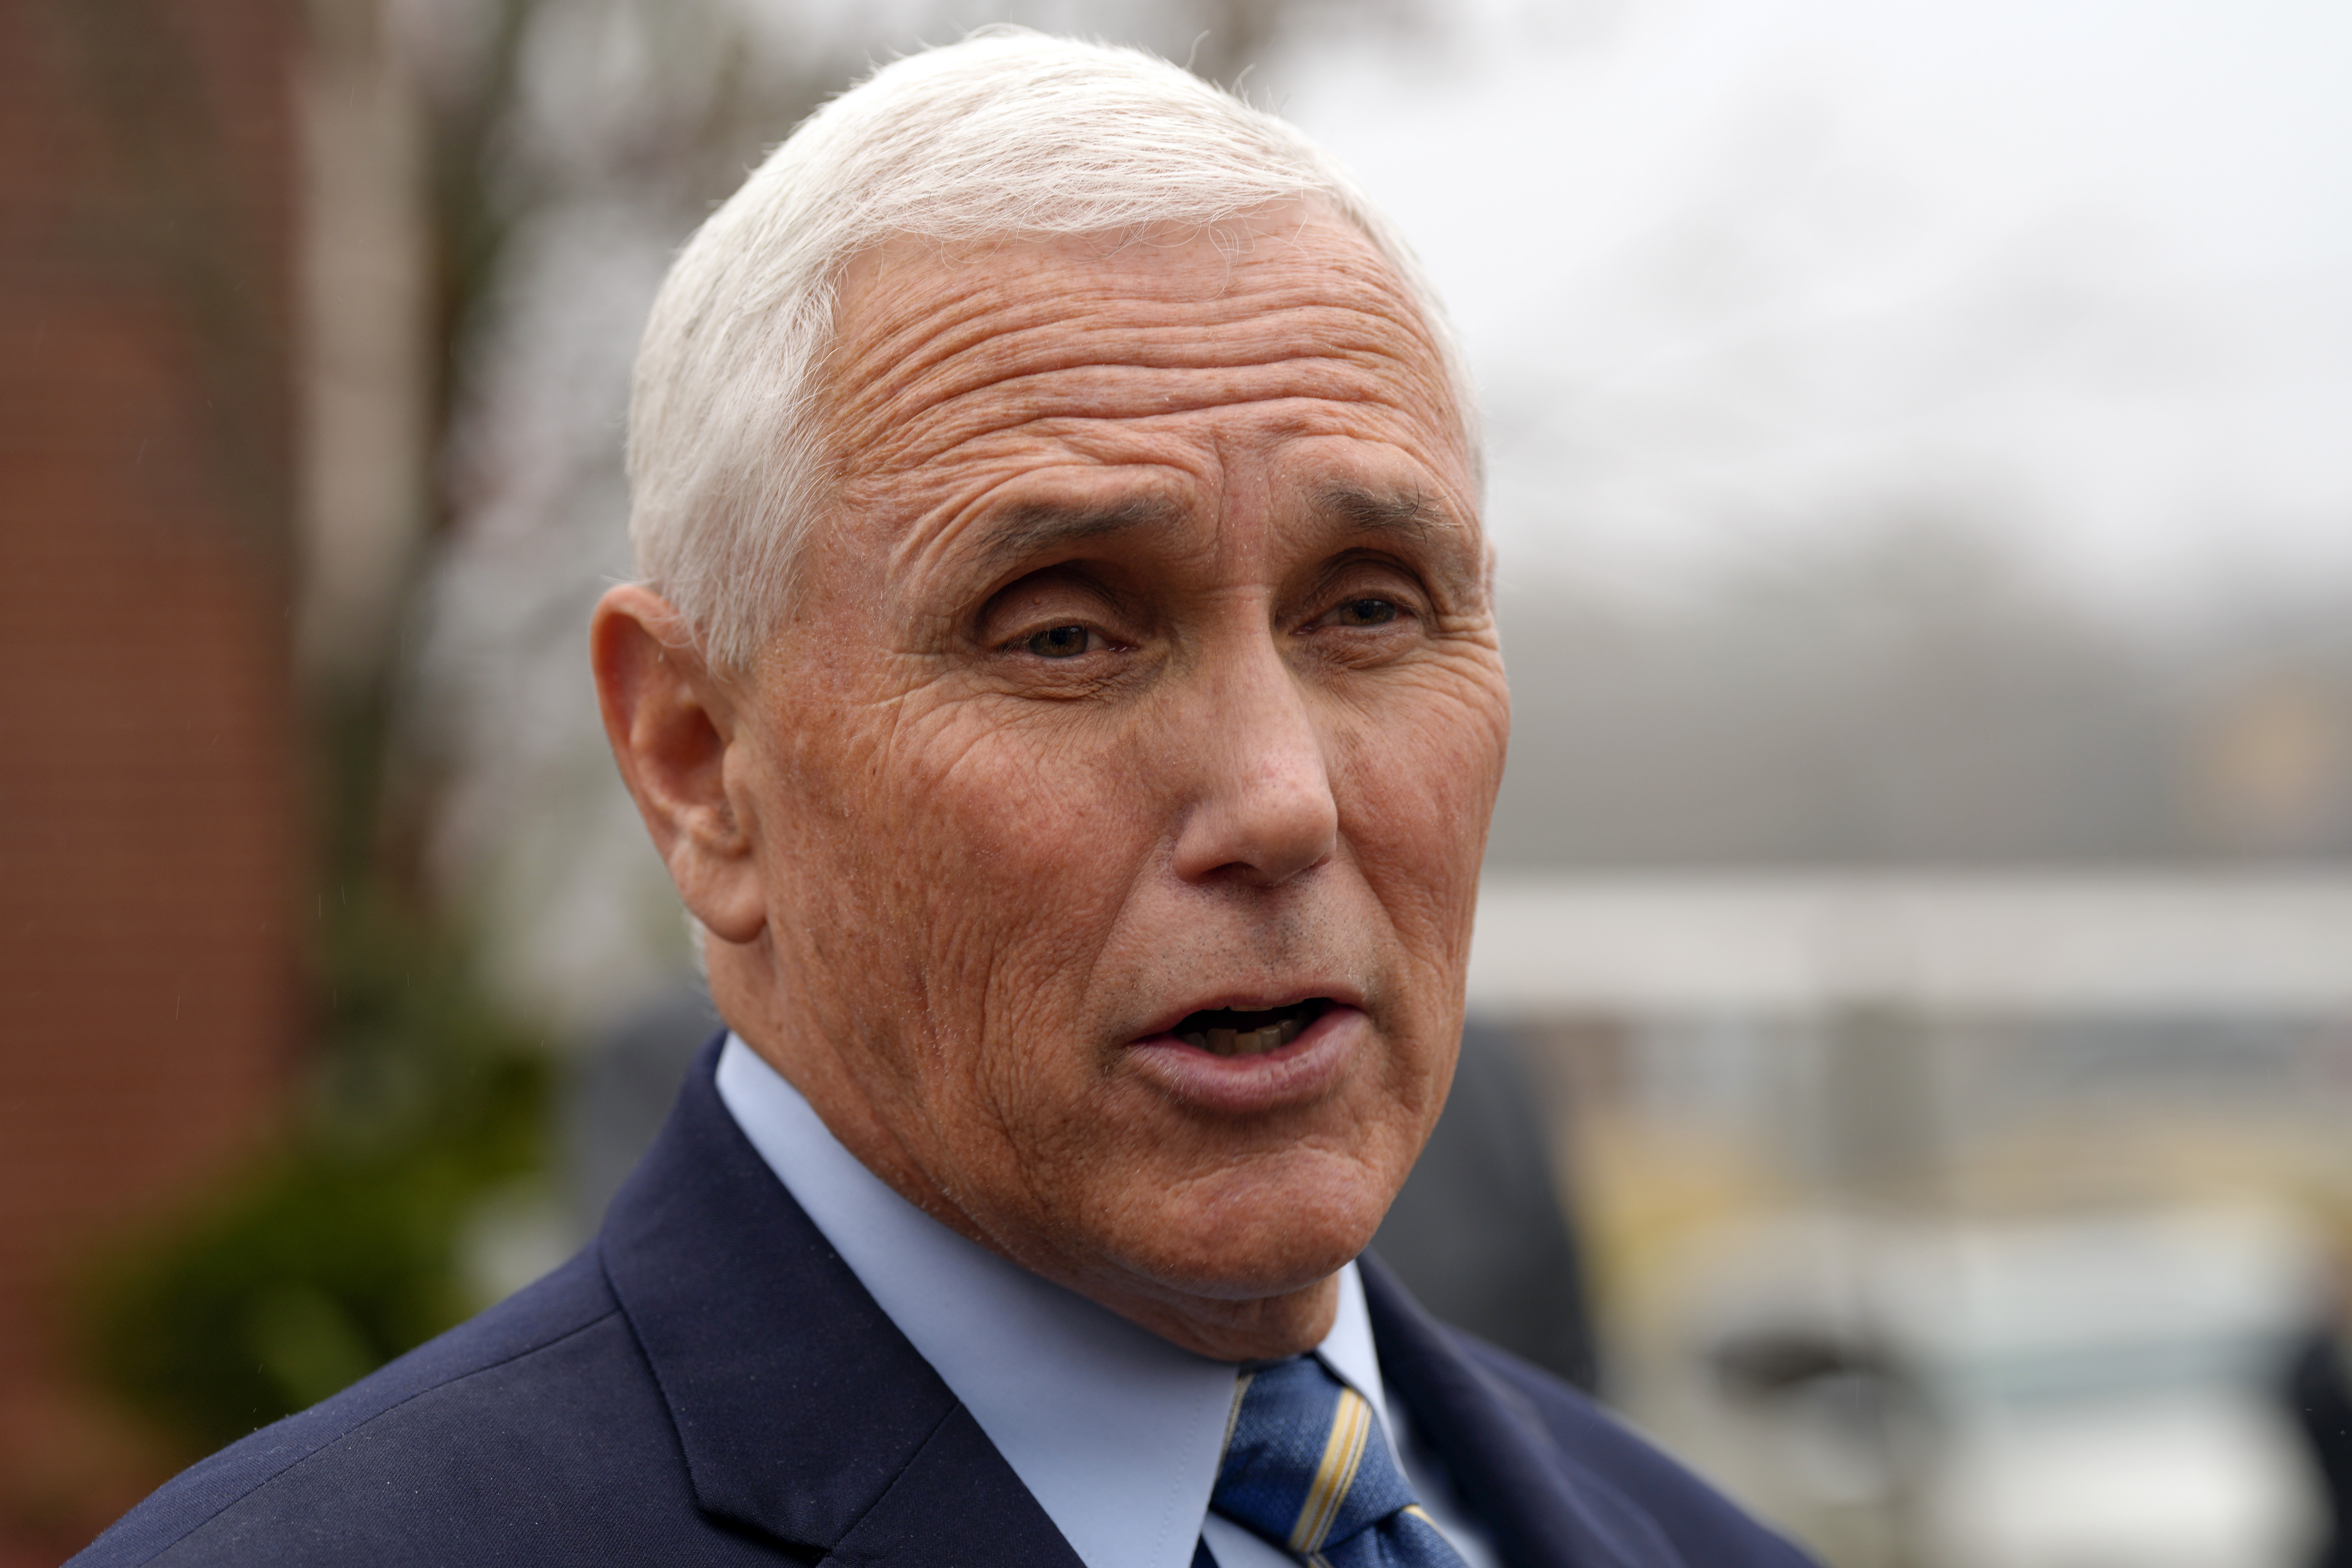 Former US Vice President Mike Pence speaks to reporters on December 6, 2022 at the Garden Sanctuary Church of God in Rock Hill, South Carolina.  (AP Photo/Meg Kinnard, File)